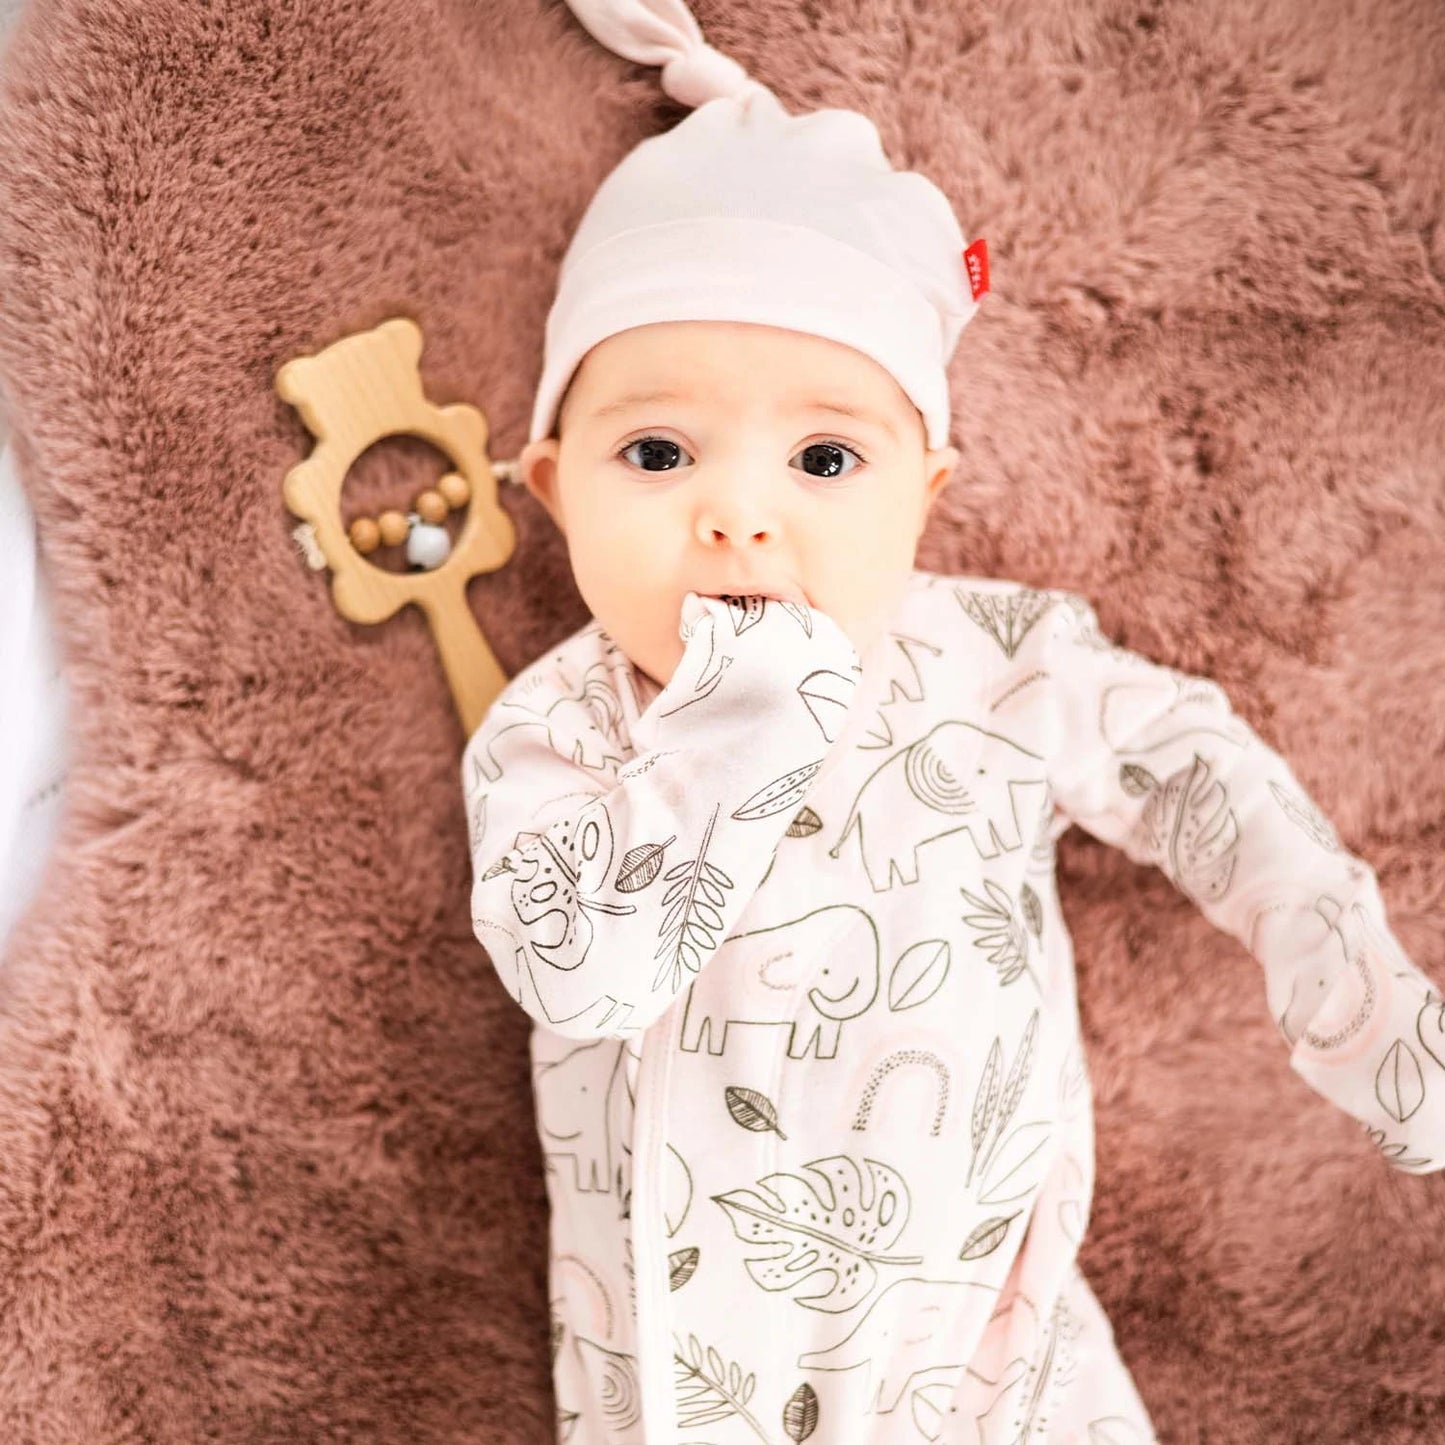 Organic Cotton Magnetic Gown & Hat - Ellie Go Lucky Pink